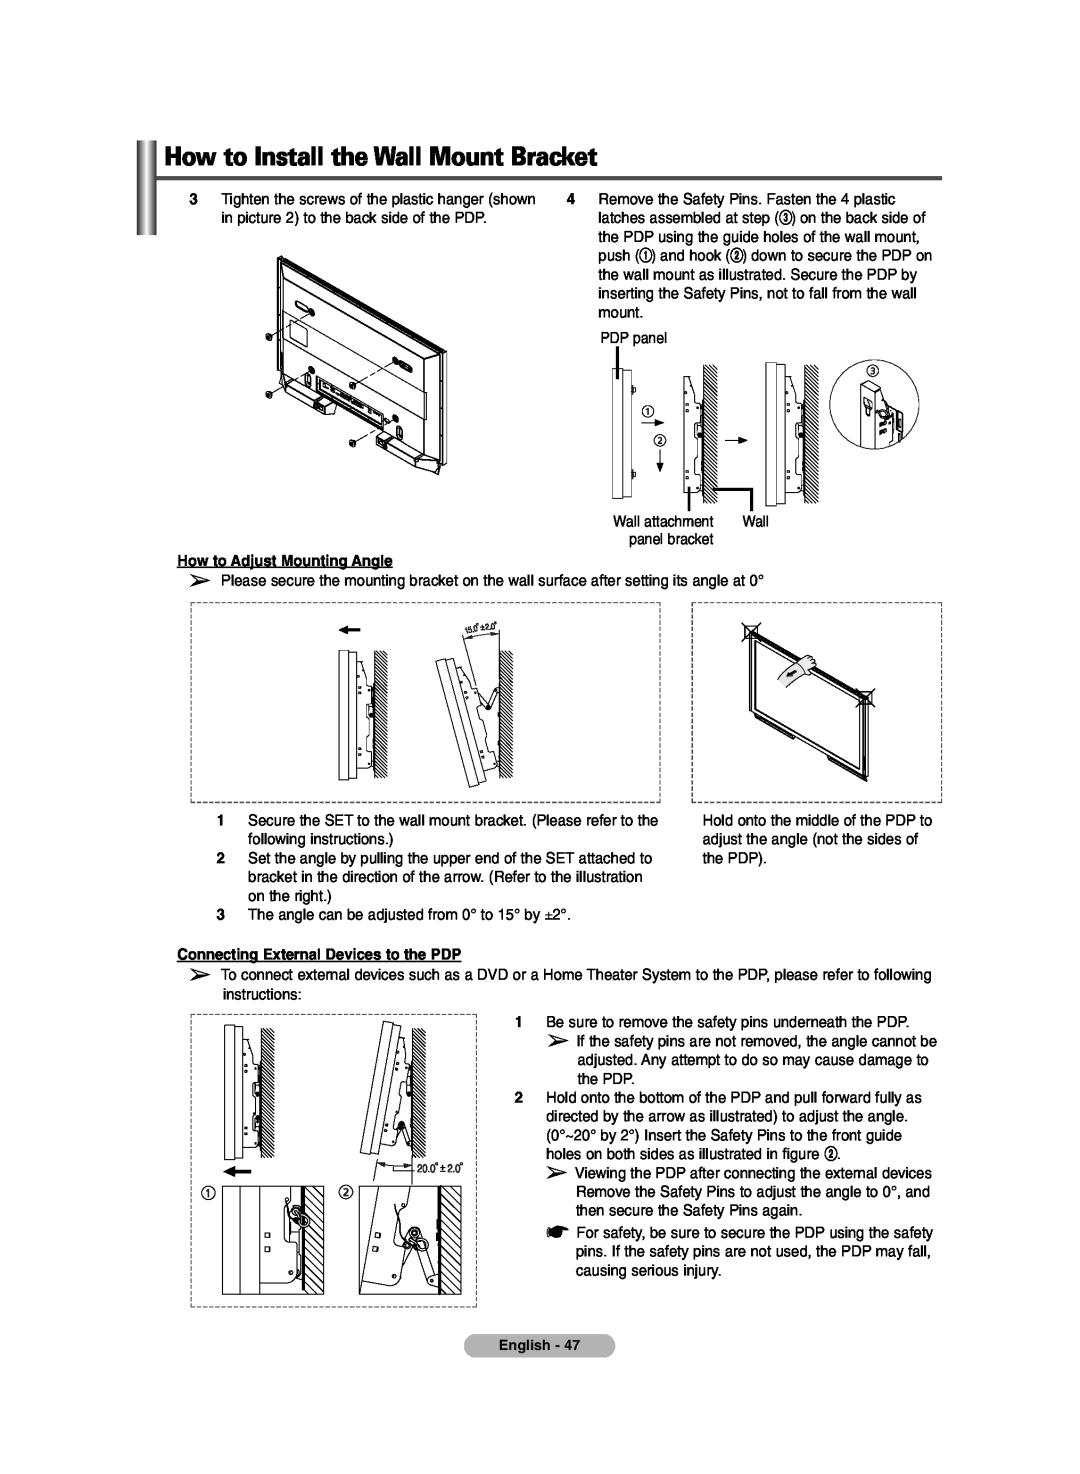 Samsung PDP-TELEVISION manual How to Install the Wall Mount Bracket, PDP panel 